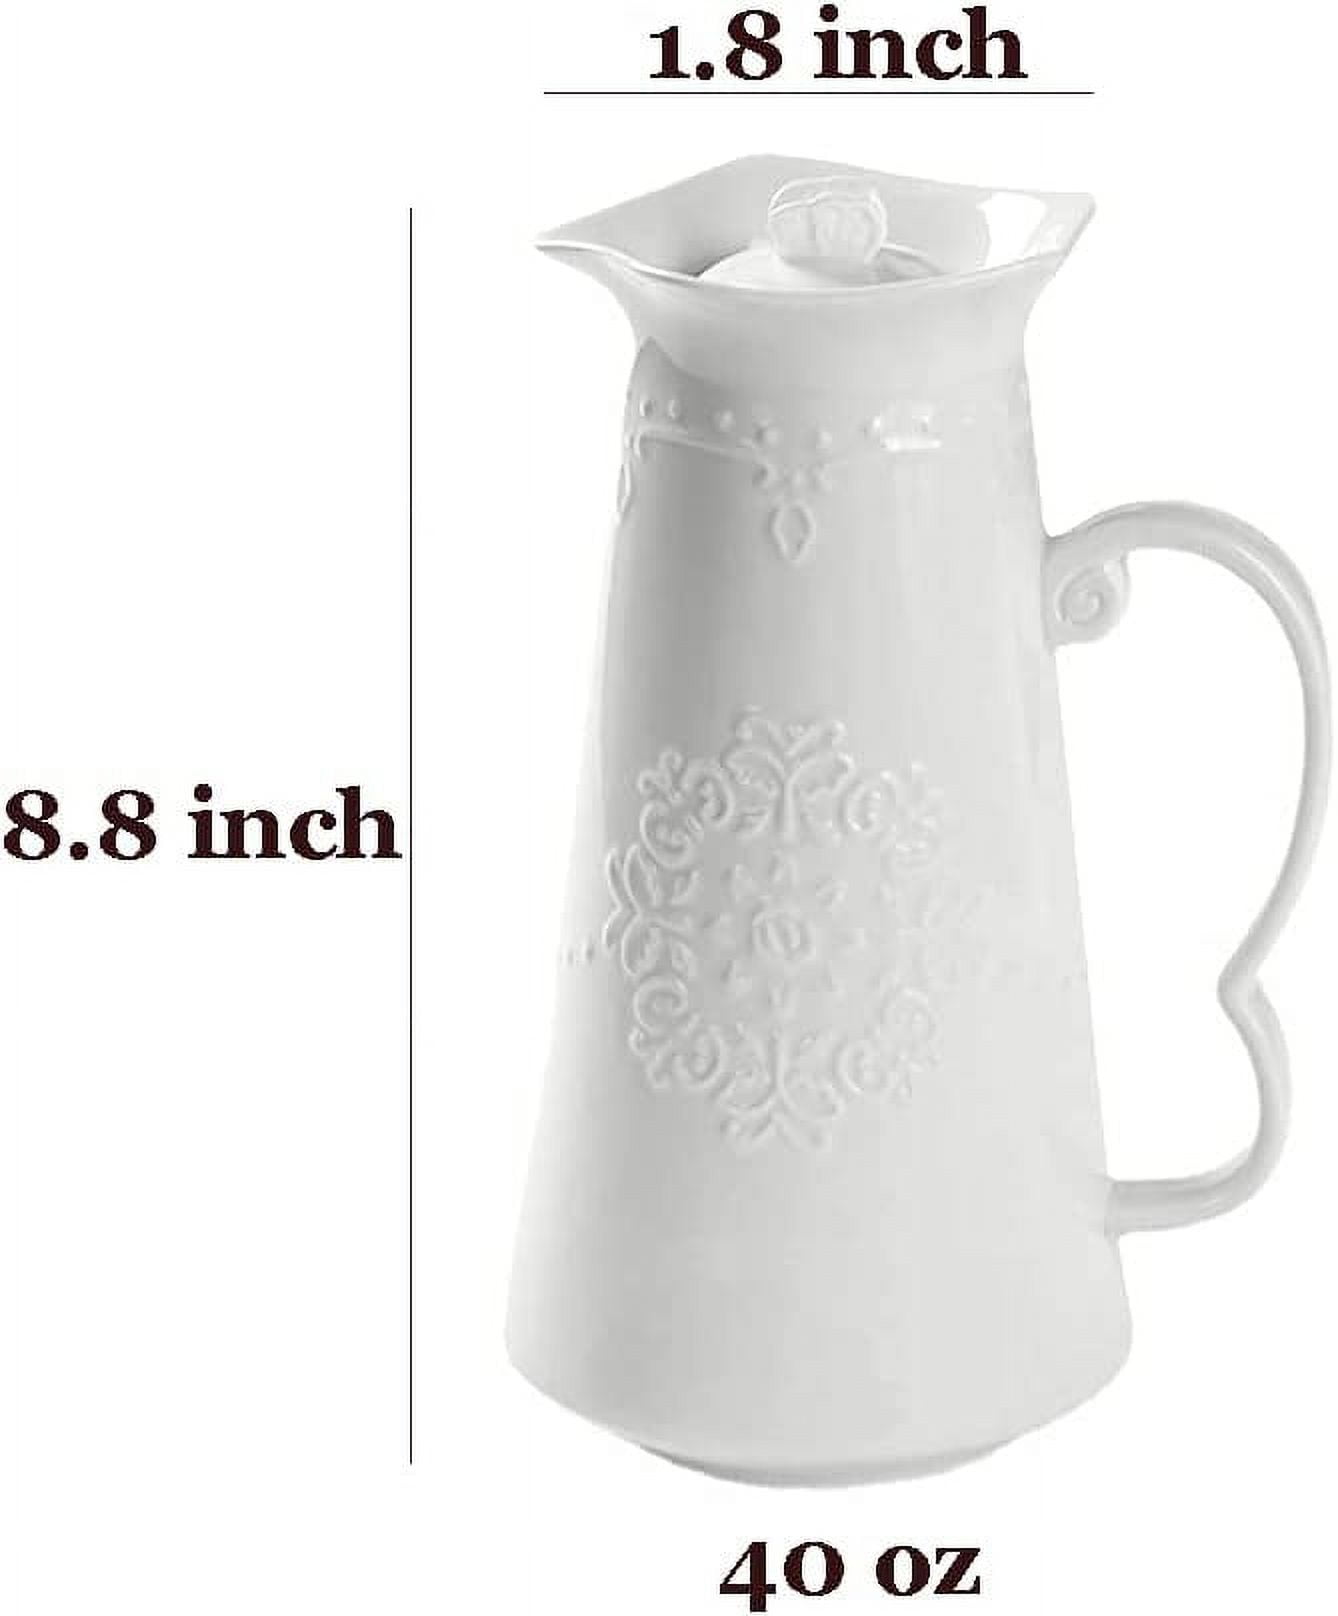 White Metal Pitcher with Candle Décor and Warm White LED Lgt